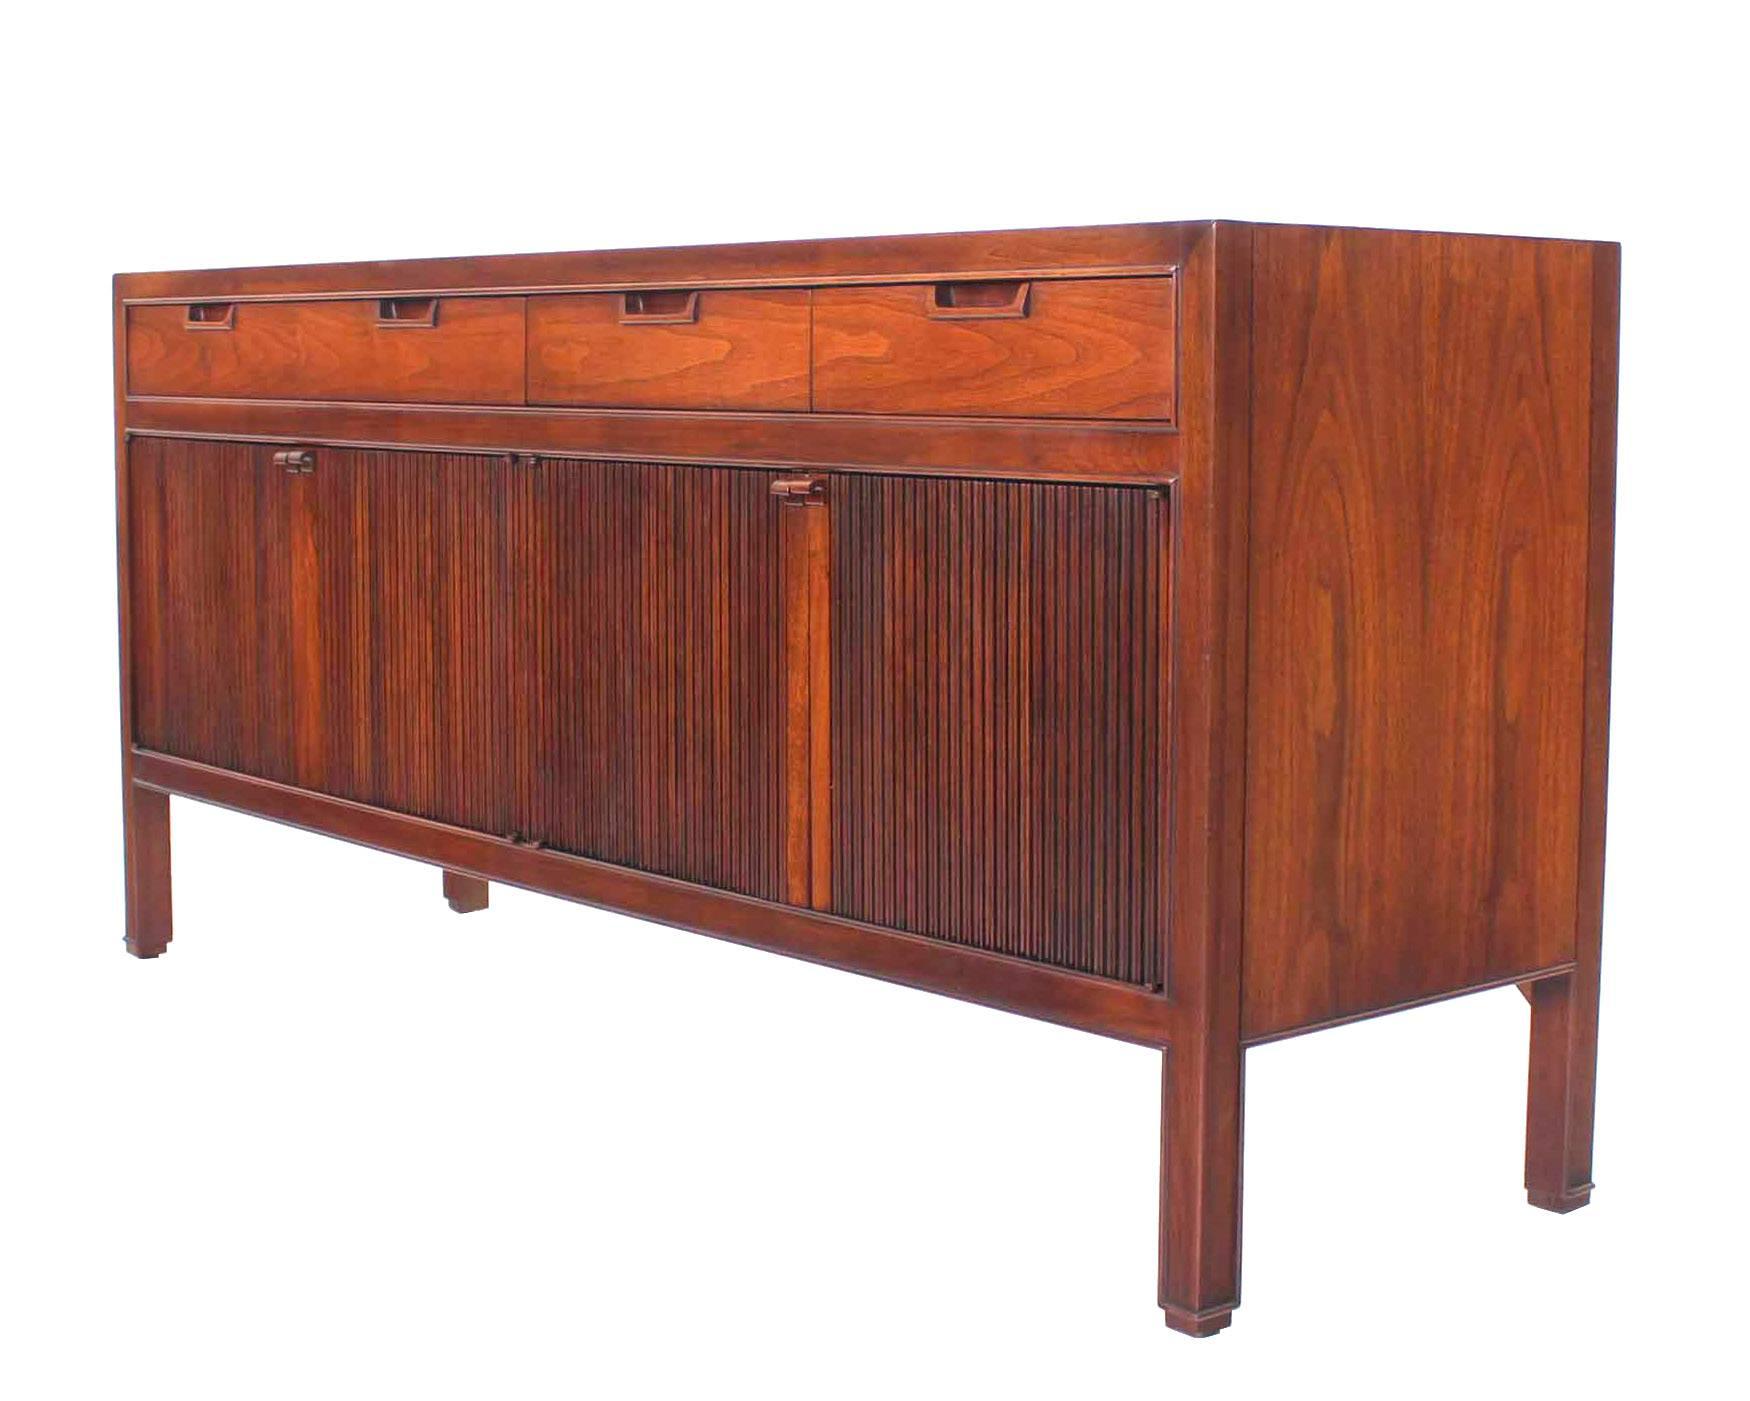 Lacquered Mid Century Modern Walnut Long Credenza Dresser Fluted Panels Doors Cabinet 